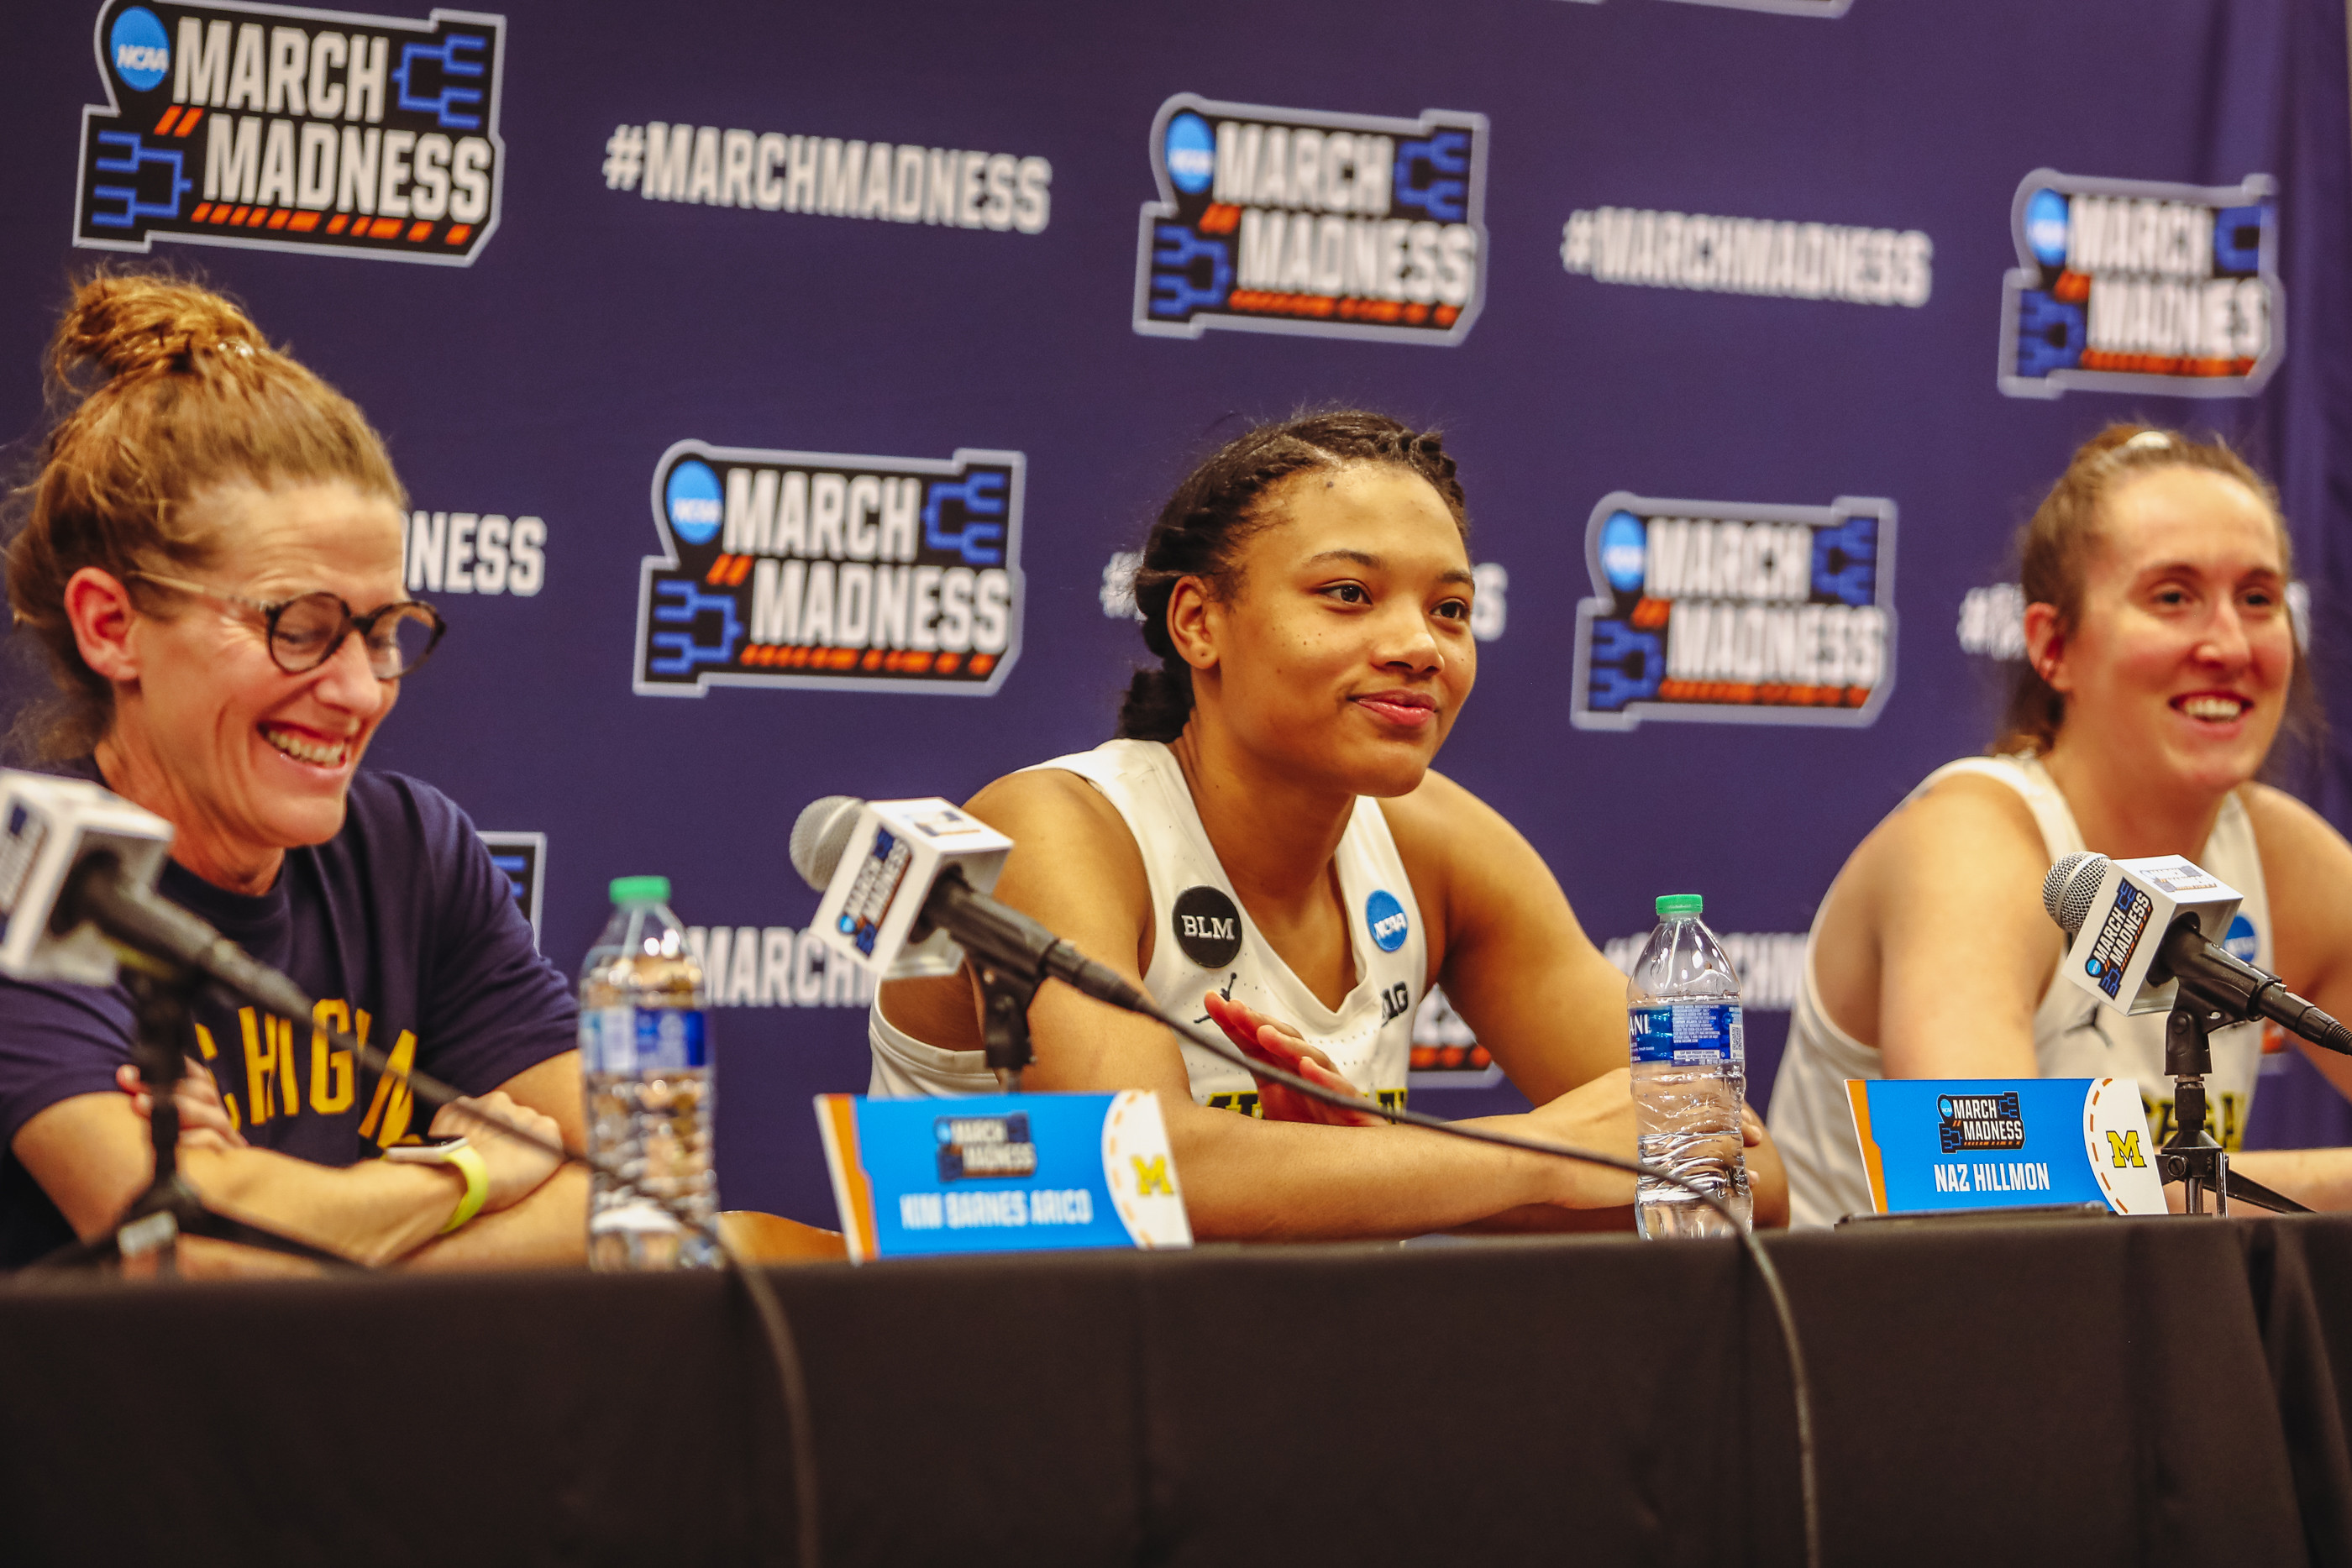 University of Michigan Women's Basketball players at a post-game press conference, 2022.